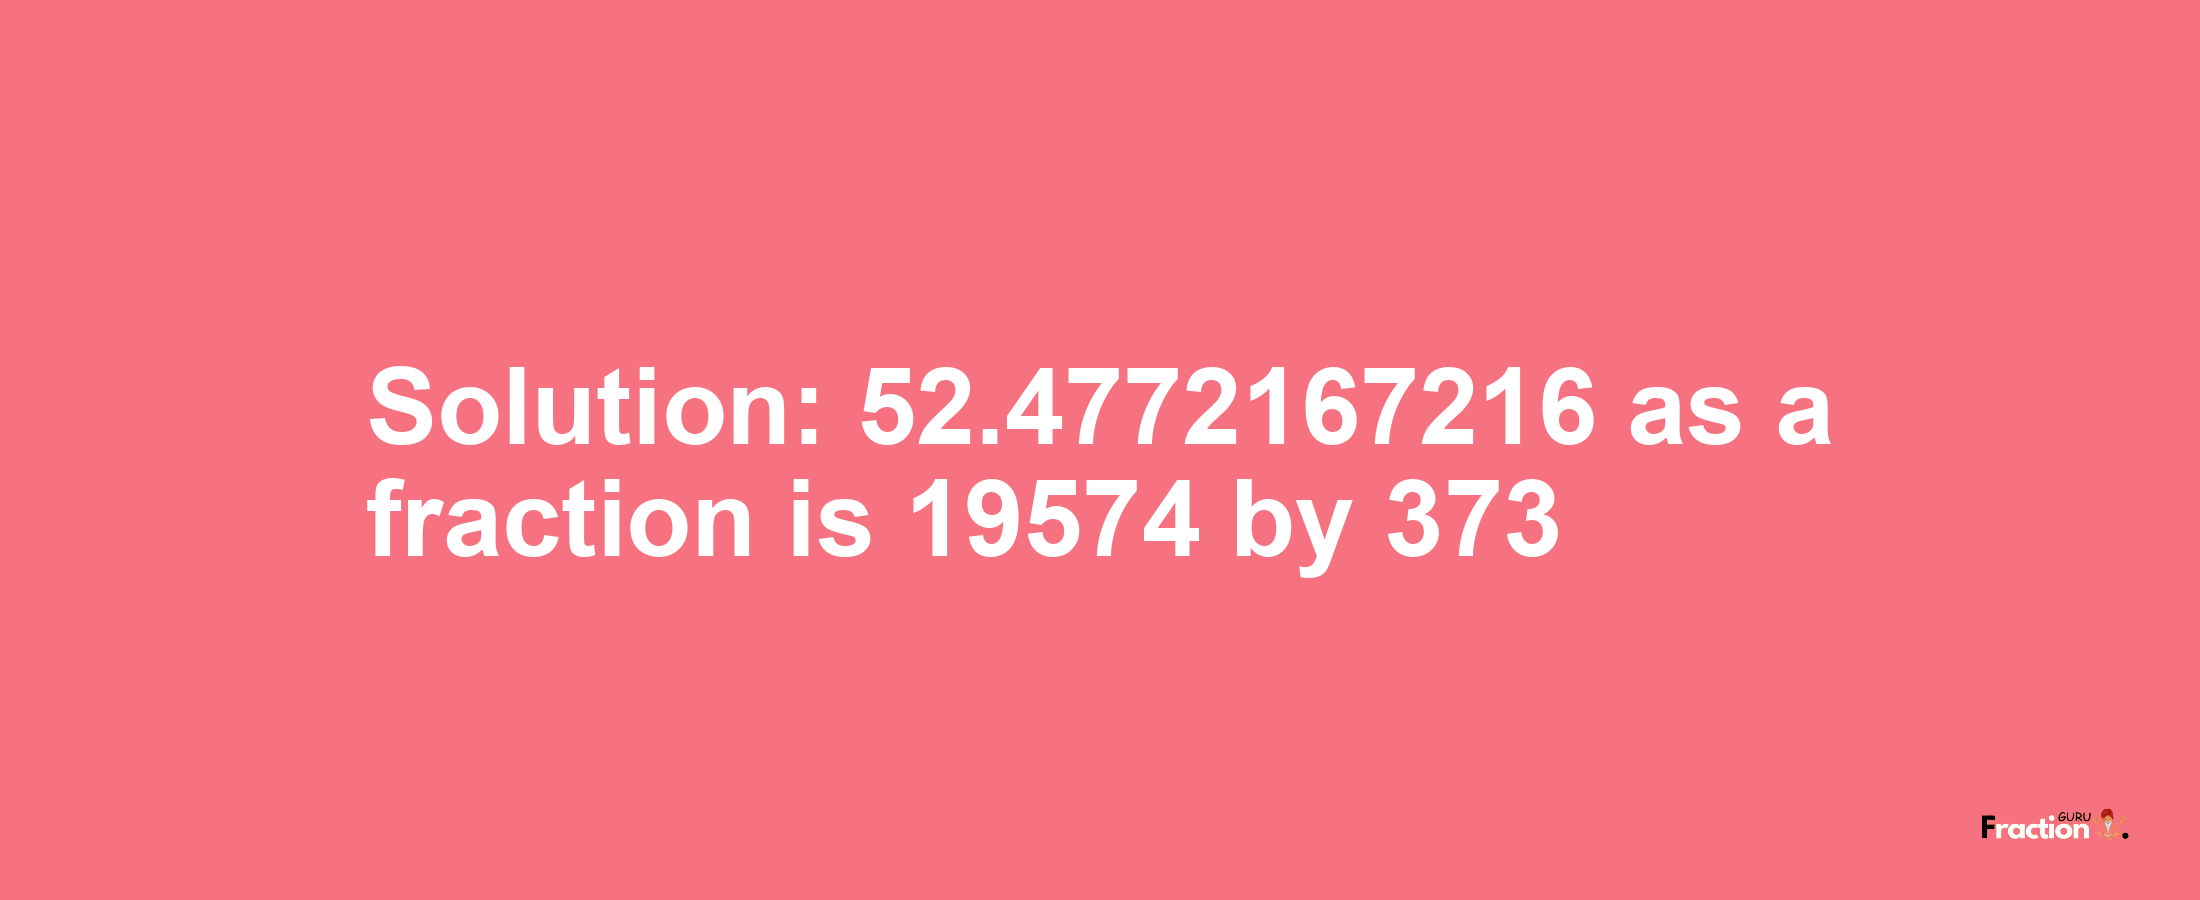 Solution:52.4772167216 as a fraction is 19574/373